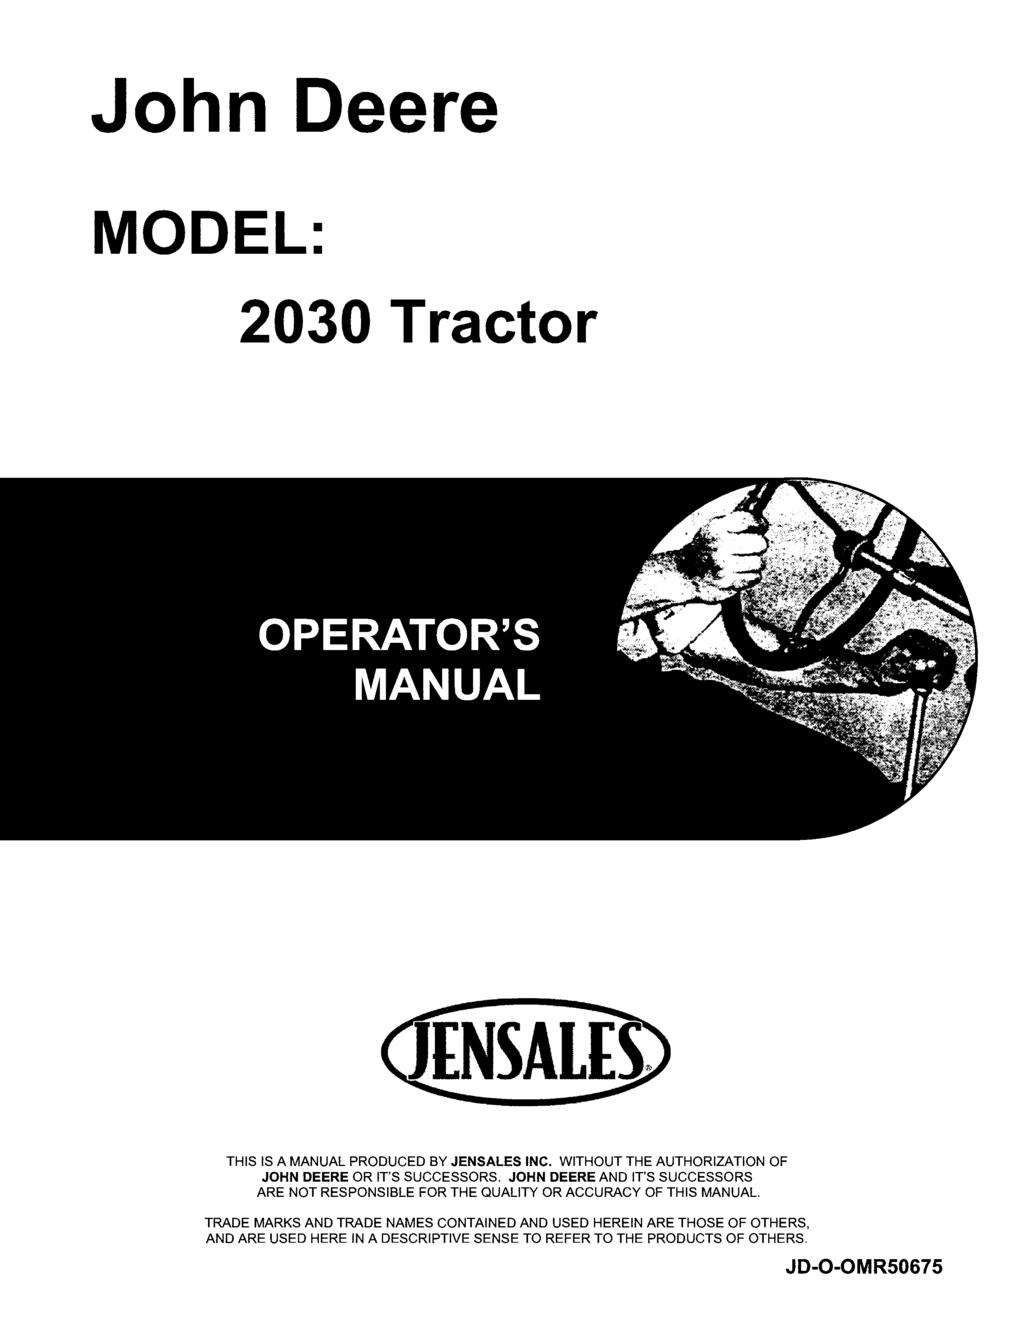 John Deere MODEL: 2030 Tractor THIS IS A MANUAL PRODUCED BY JENSALES INC. WITHOUT THE AUTHORIZATION OF JOHN DEERE OR IT'S SUCCESSORS.